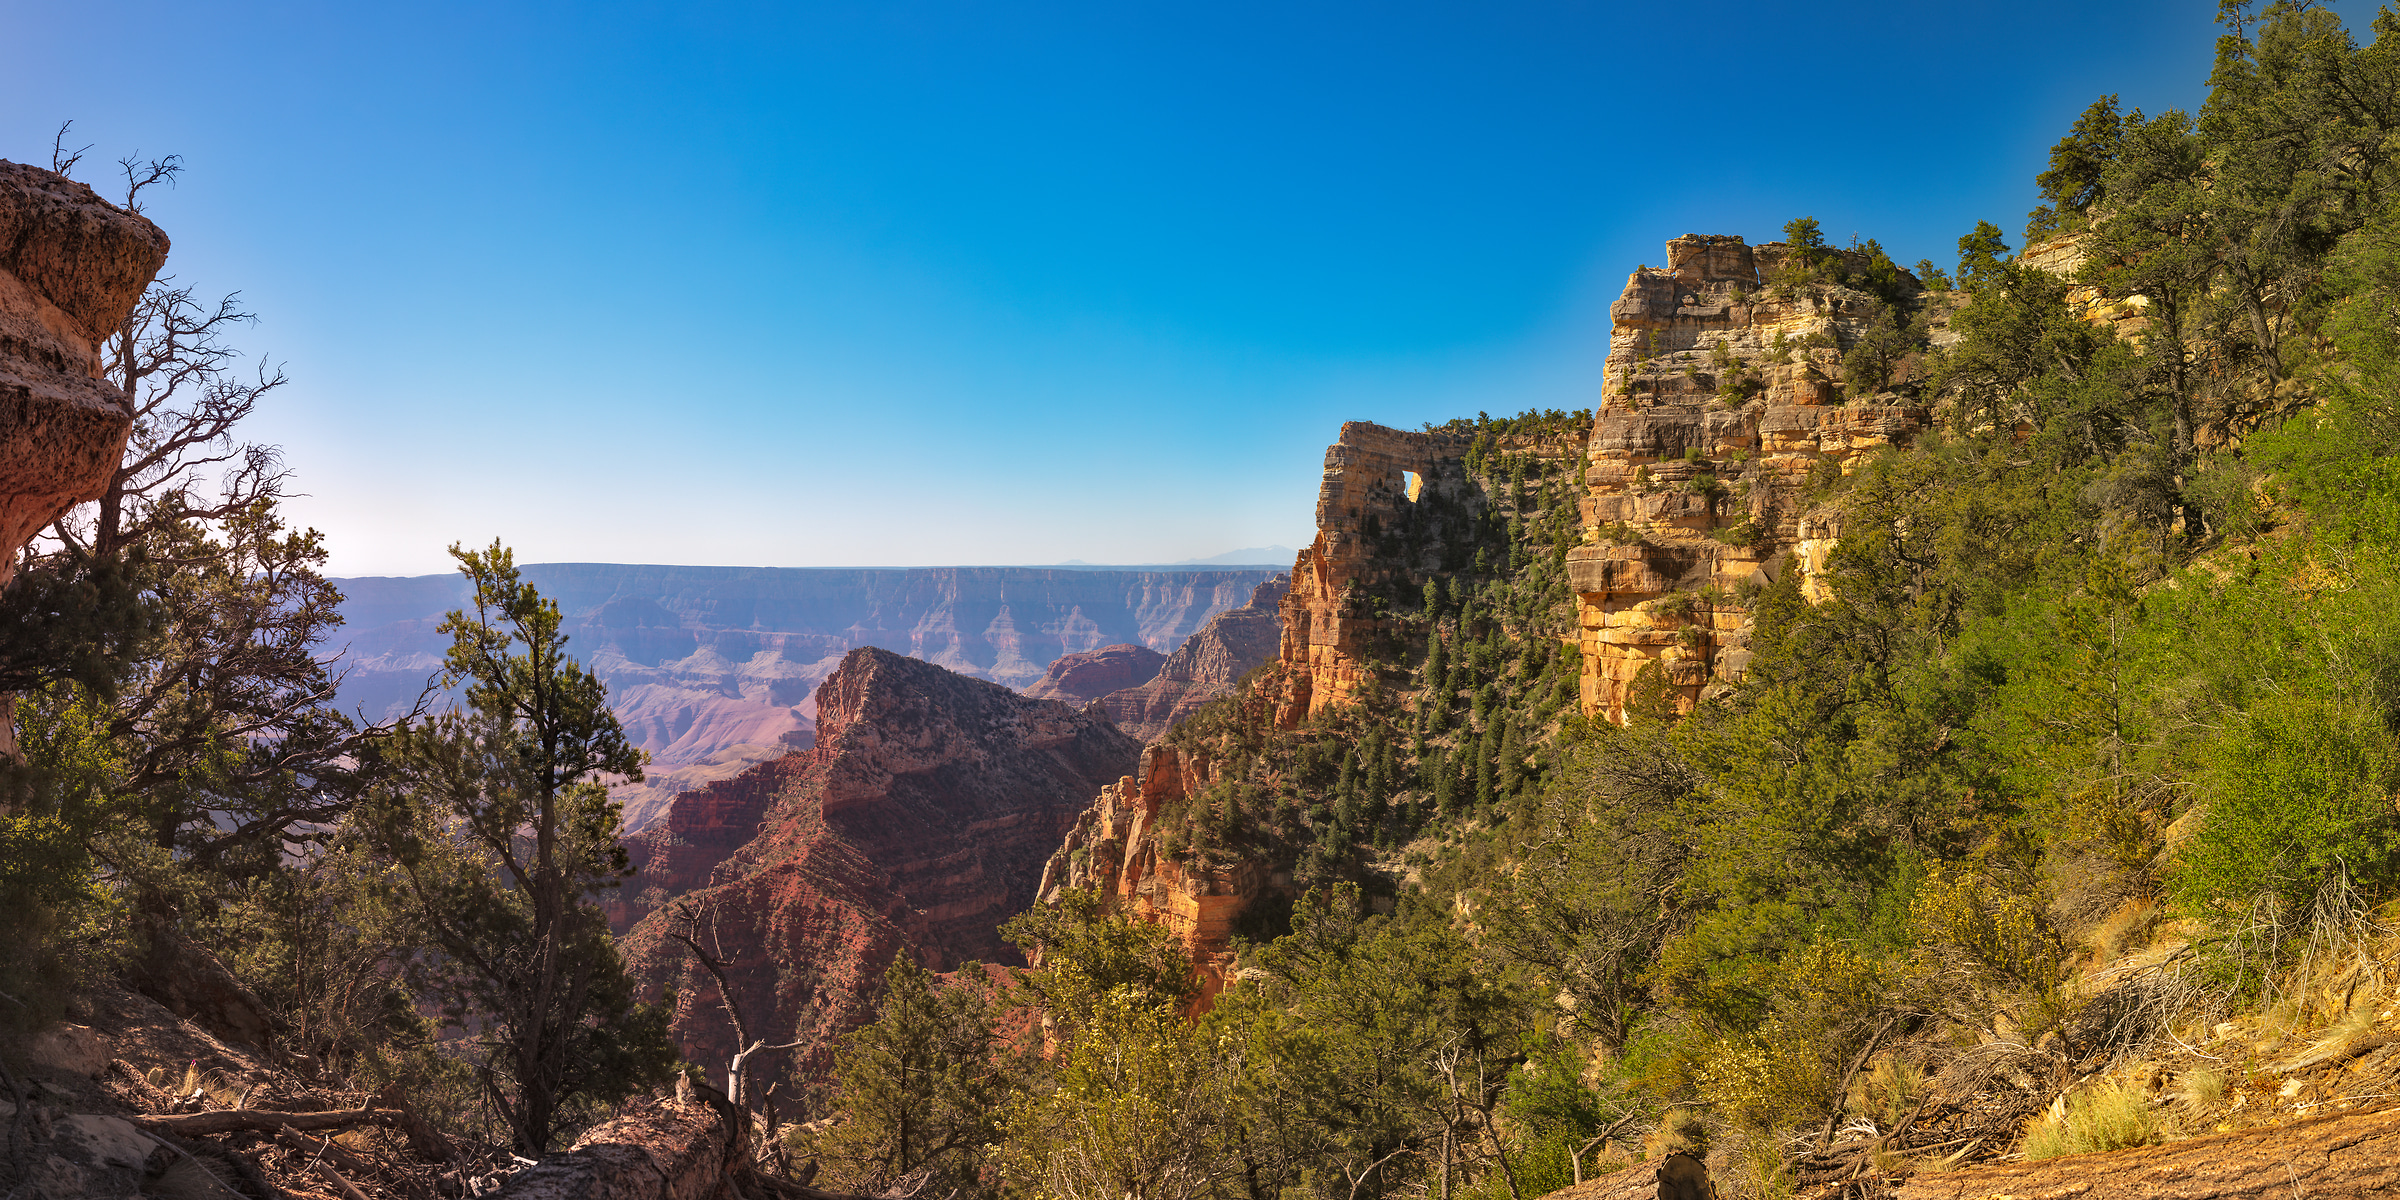 615 megapixels! A very high resolution, large-format VAST photo print of Angles Window at the Grand Canyon; landscape photograph created by John Freeman in Cape Royal, North Rim, Grand Canyon National Park, Arizona.